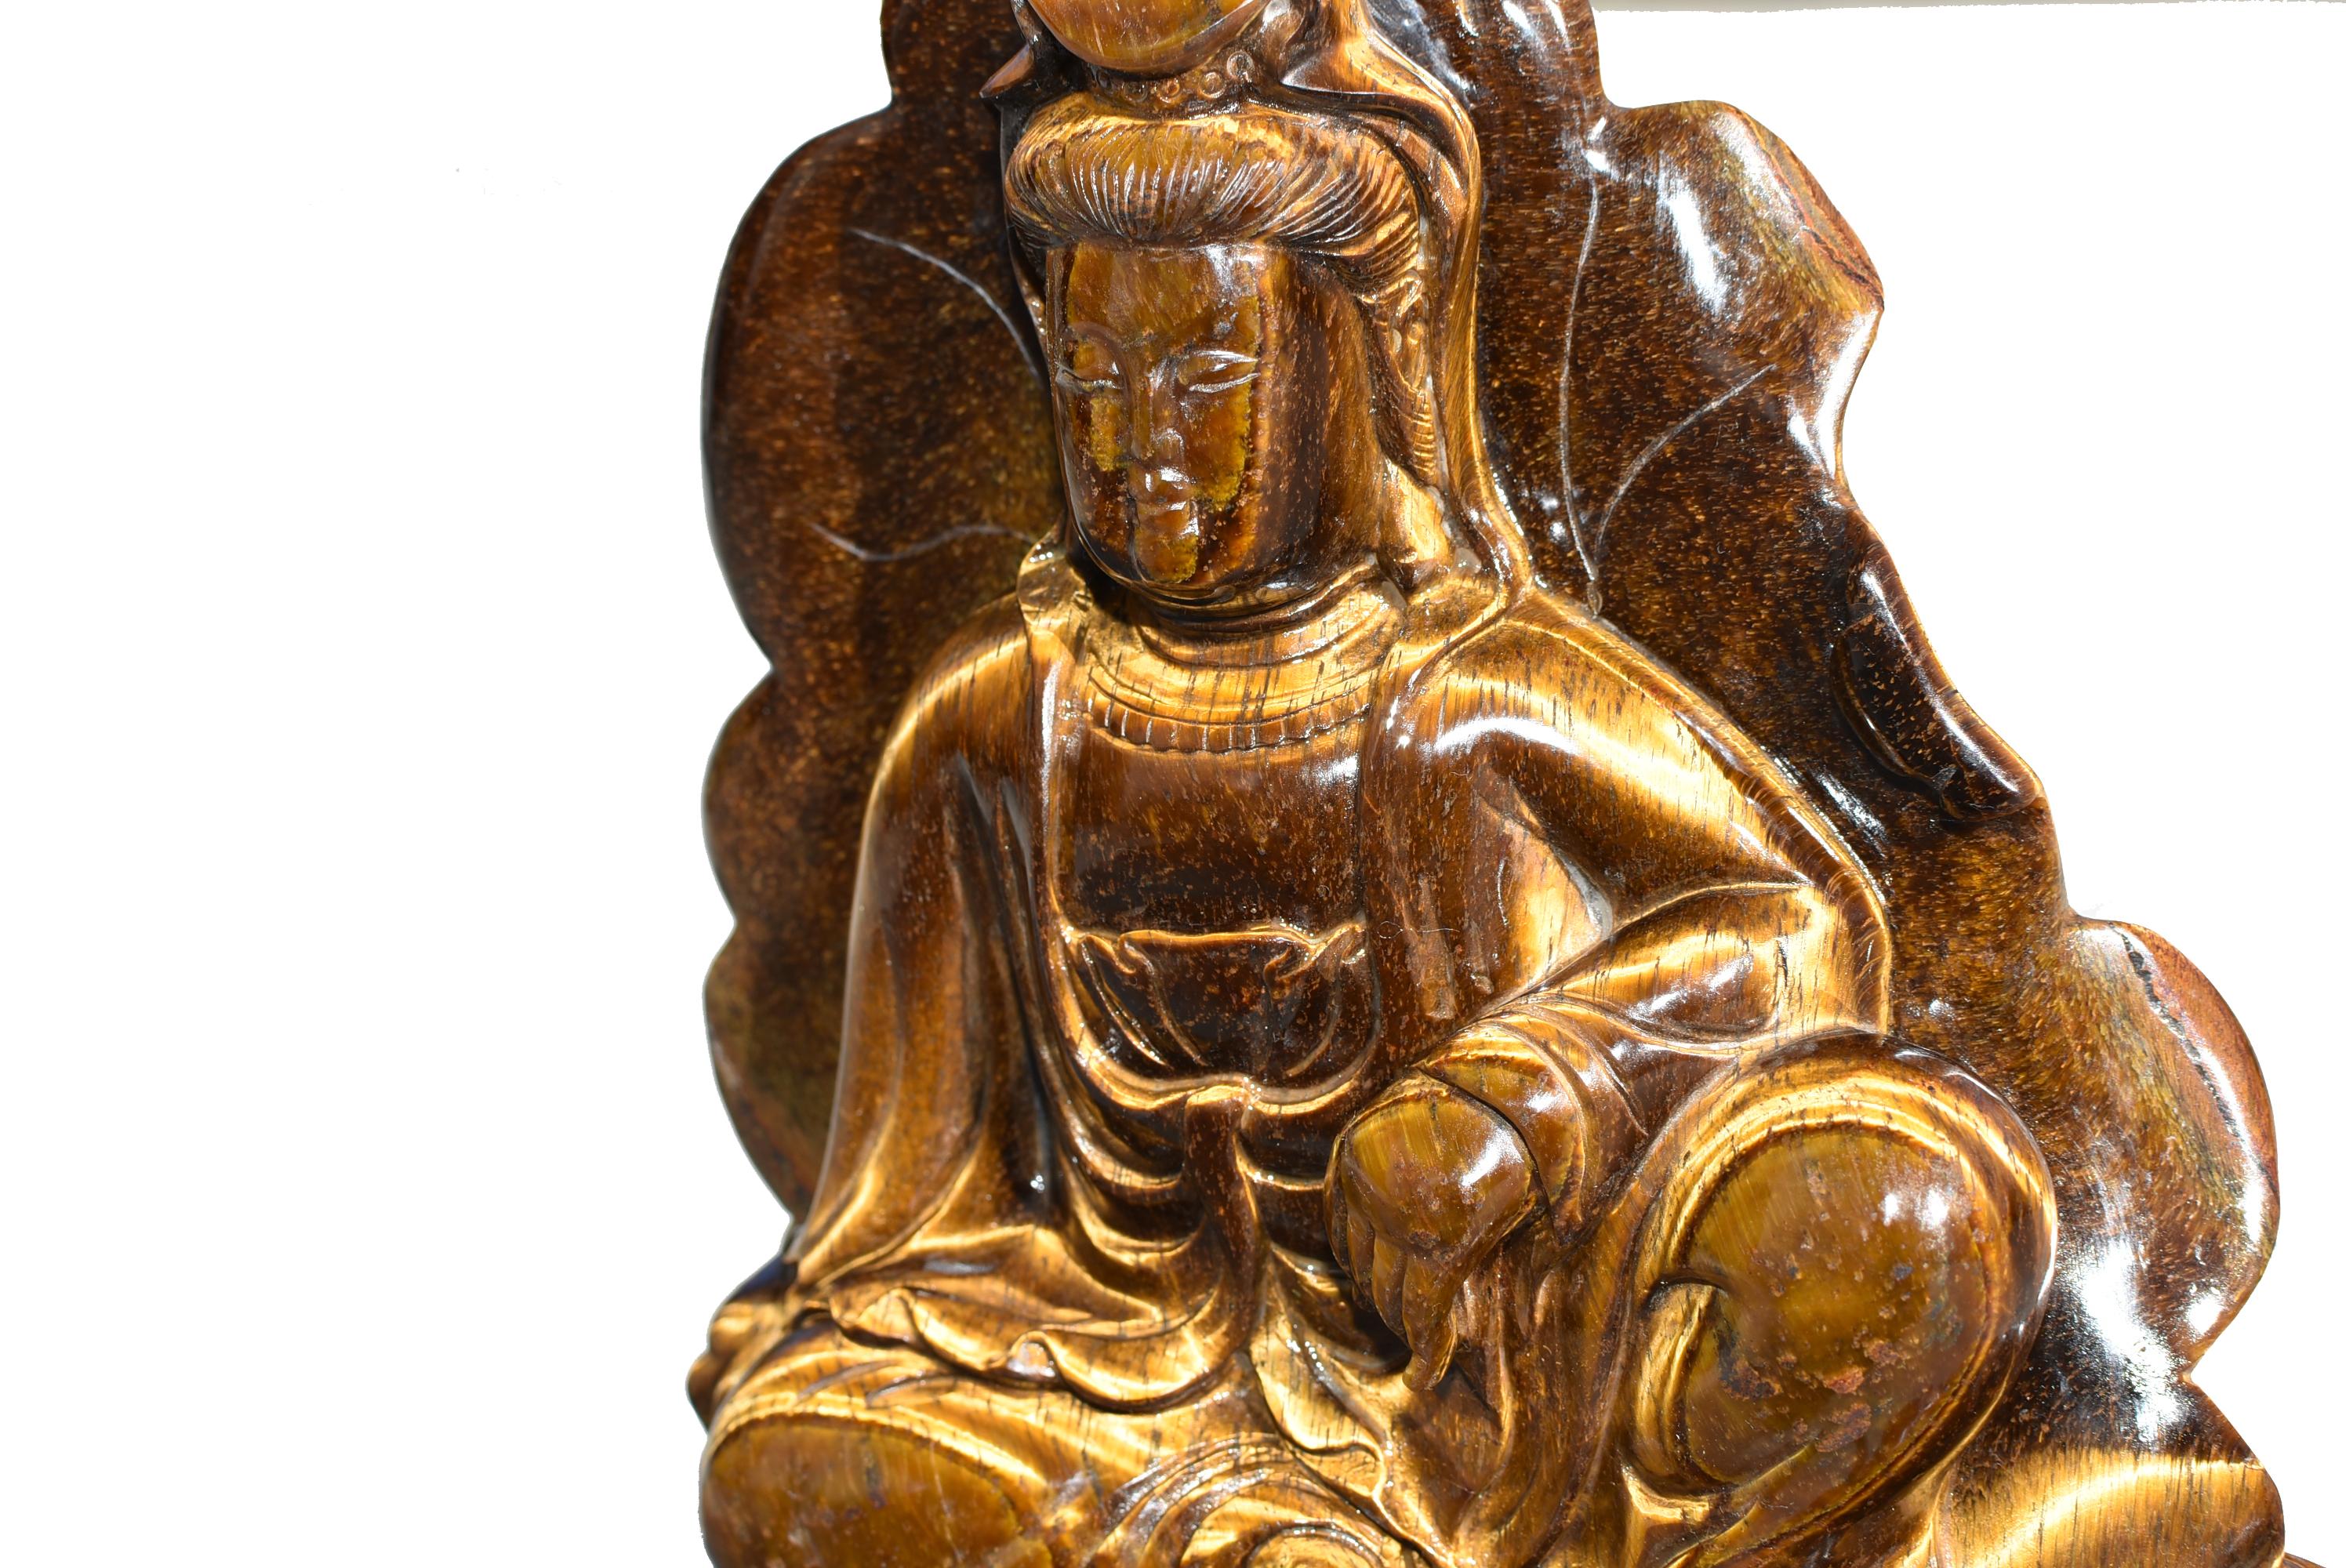 A magnificent natural Tiger's Eye sculpture depicting the compassionate Bodhisattva Water Moon Guan Yin, Avalokiteshvara. Seated on a lotus base in rajalilasana, the ‘posture of royal ease’, backed by a lotus leaf, Avalokiteshvara wears a hooded